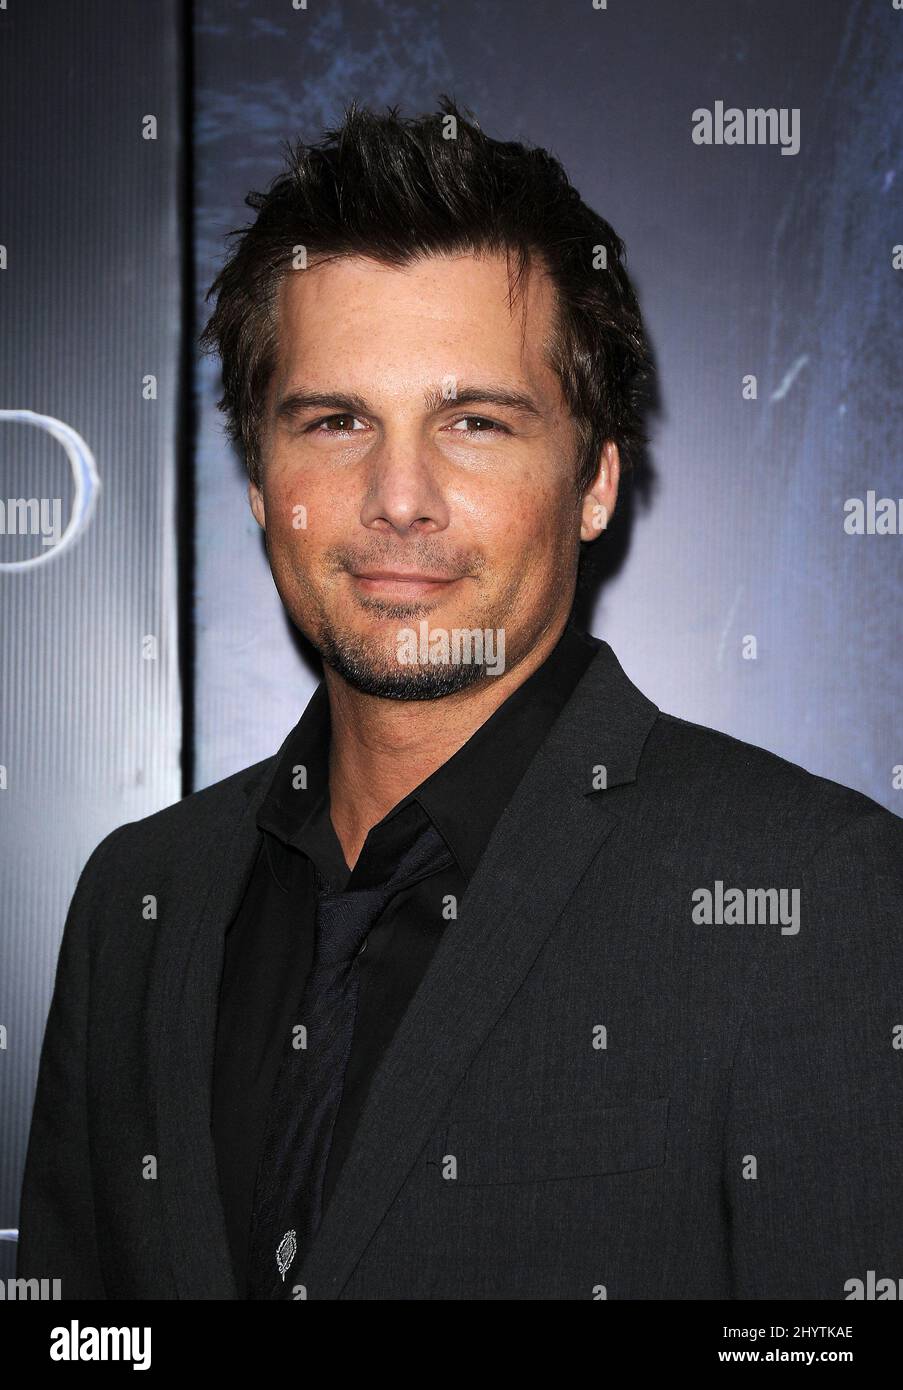 Len Wiseman attending the 'Underworld: Rise of the Lycans' World Premiere, Los Angeles. Stock Photo